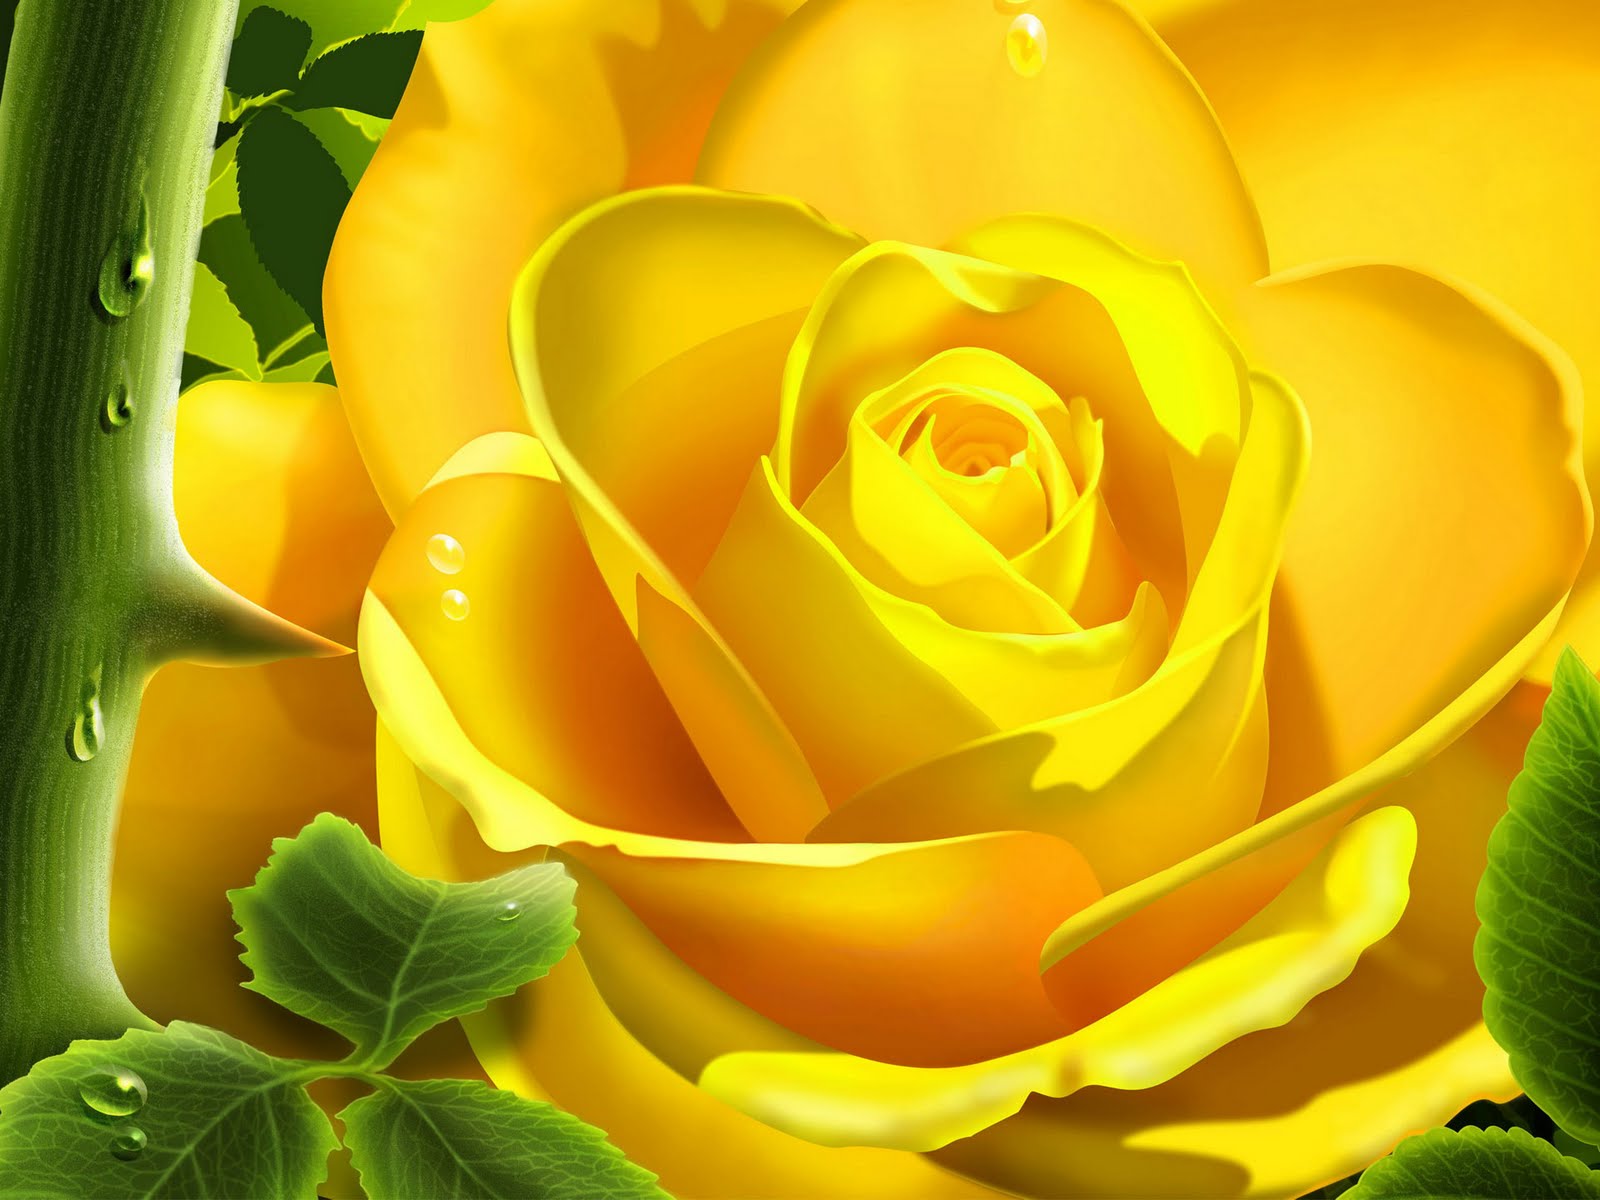 yellow rose wallpapers |Clickandseeworld is all about Funny|Amazing